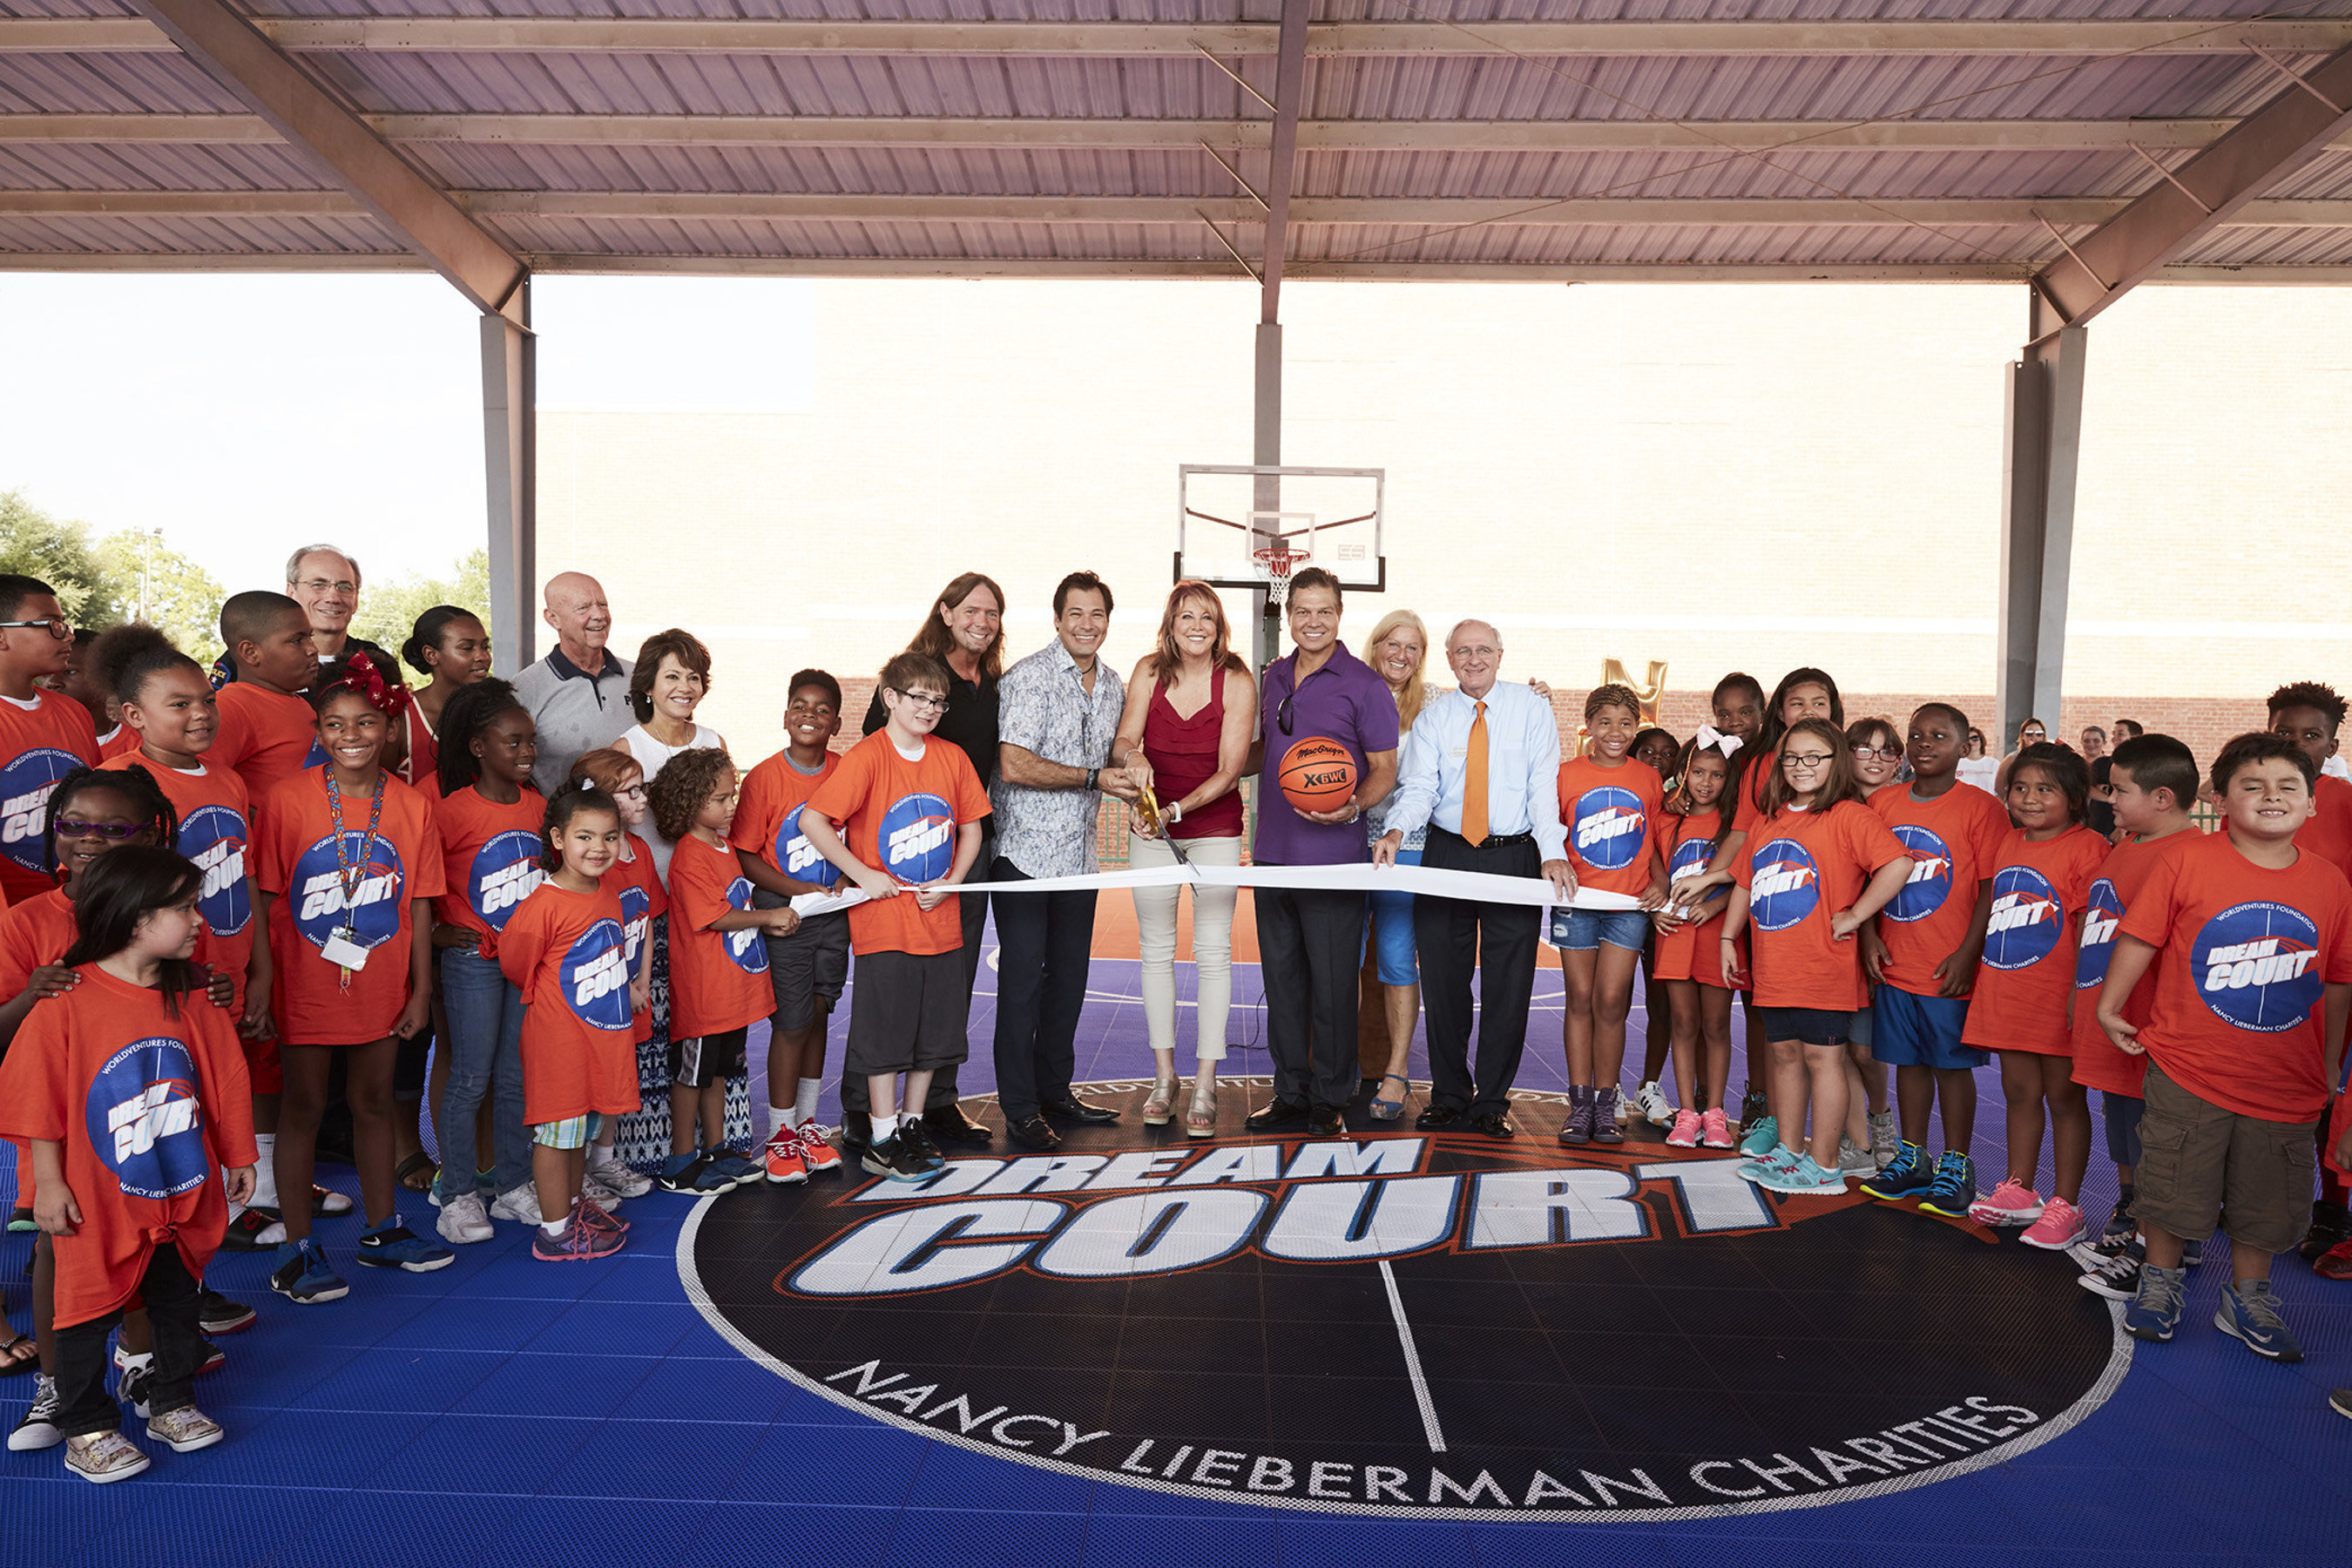 WorldVentures gifts new DreamCourt to Boys & Girls Clubs Collin County Plano Branch; in partnership with Nancy Lieberman Charities, WorldVentures Foundation and NexCourt Sport Court. Approximately 300 kids visit this combination community center and Boys & Girls Club each day.